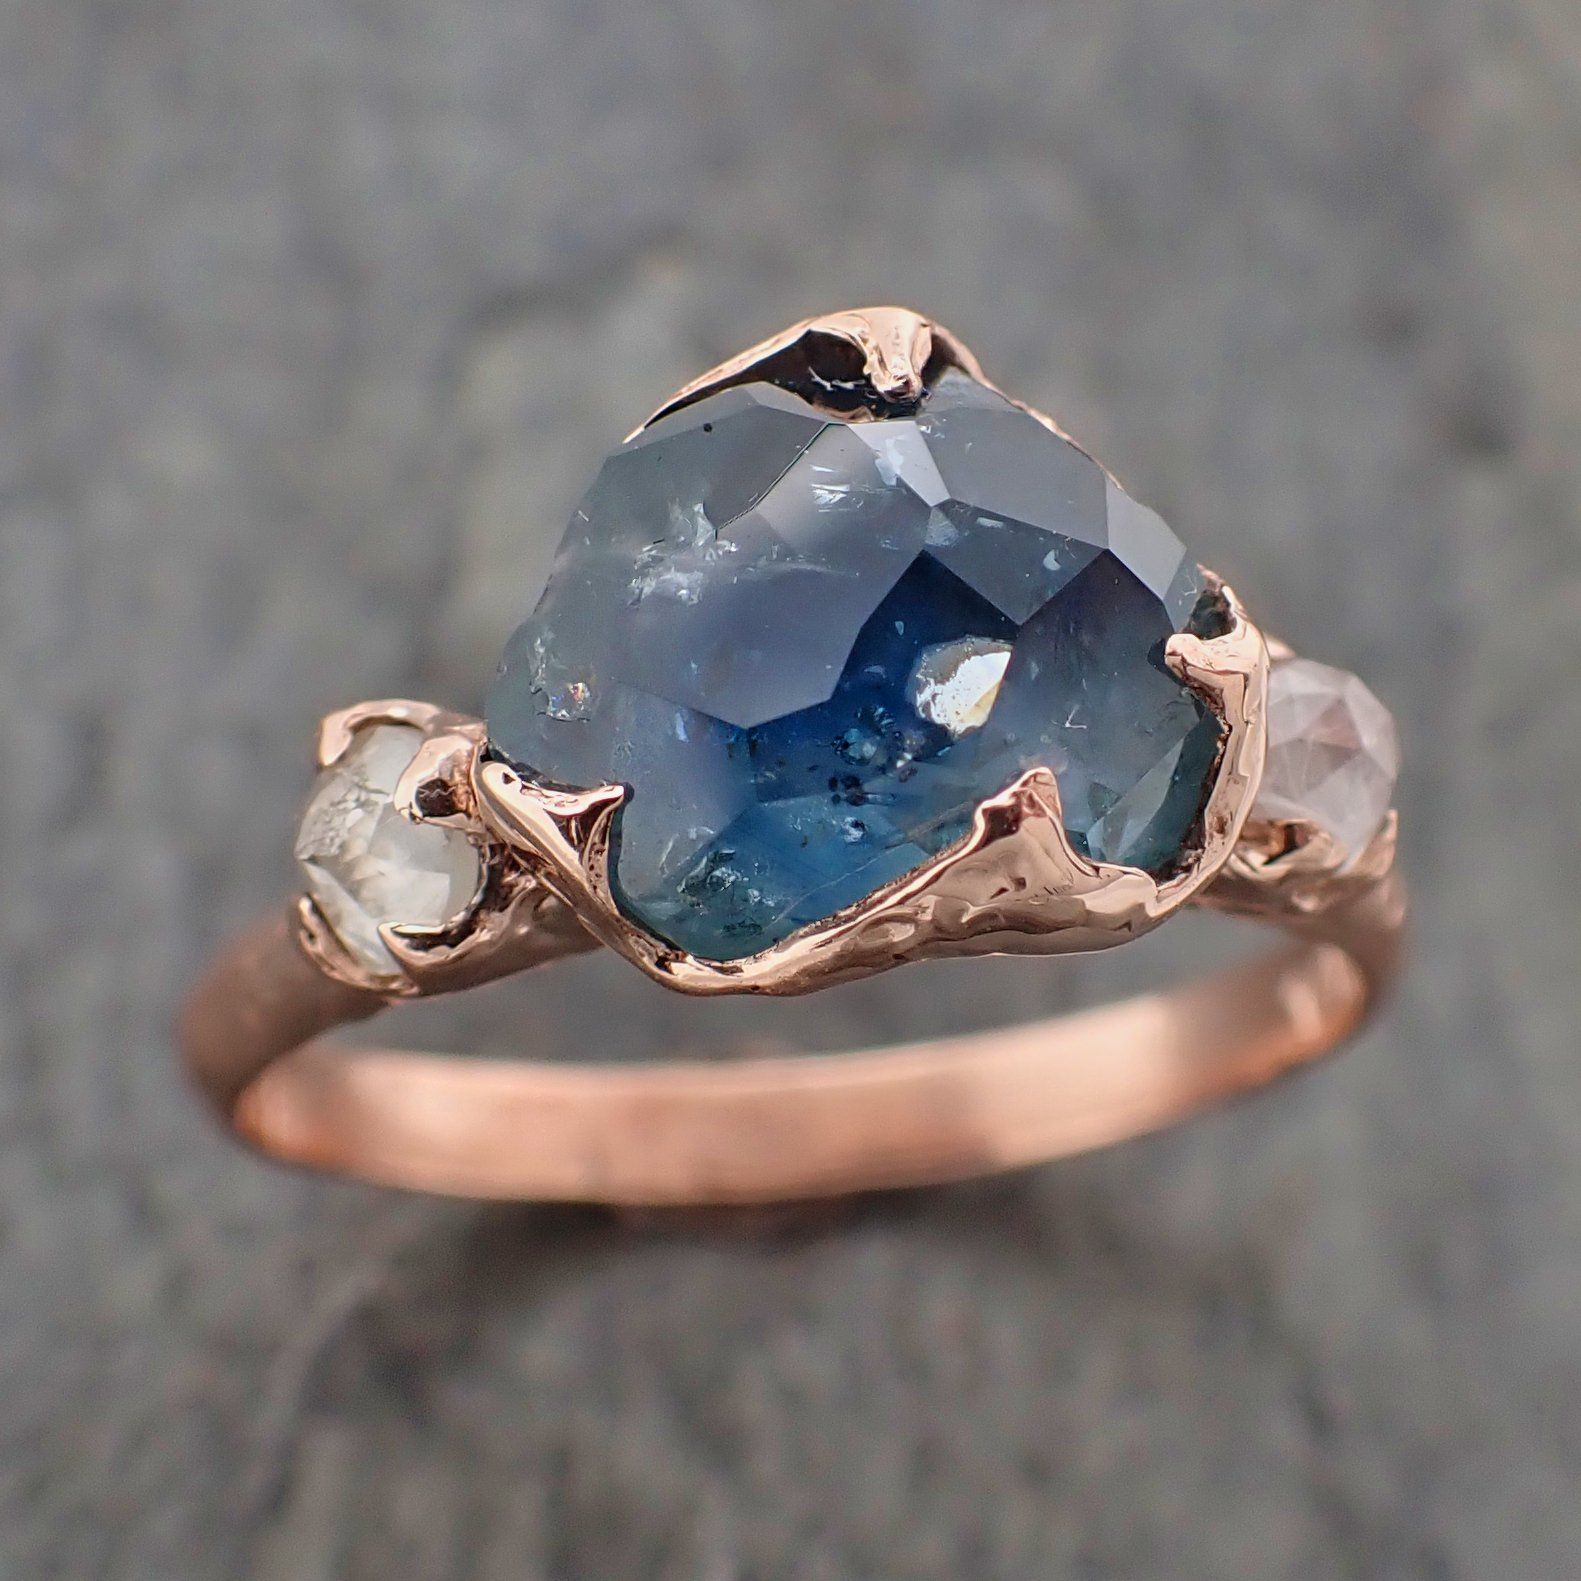 Partially faceted blue Montana Sapphire and fancy Diamonds 14k Rose Gold Engagement Wedding Ring Gemstone Ring Multi stone Ring 2194